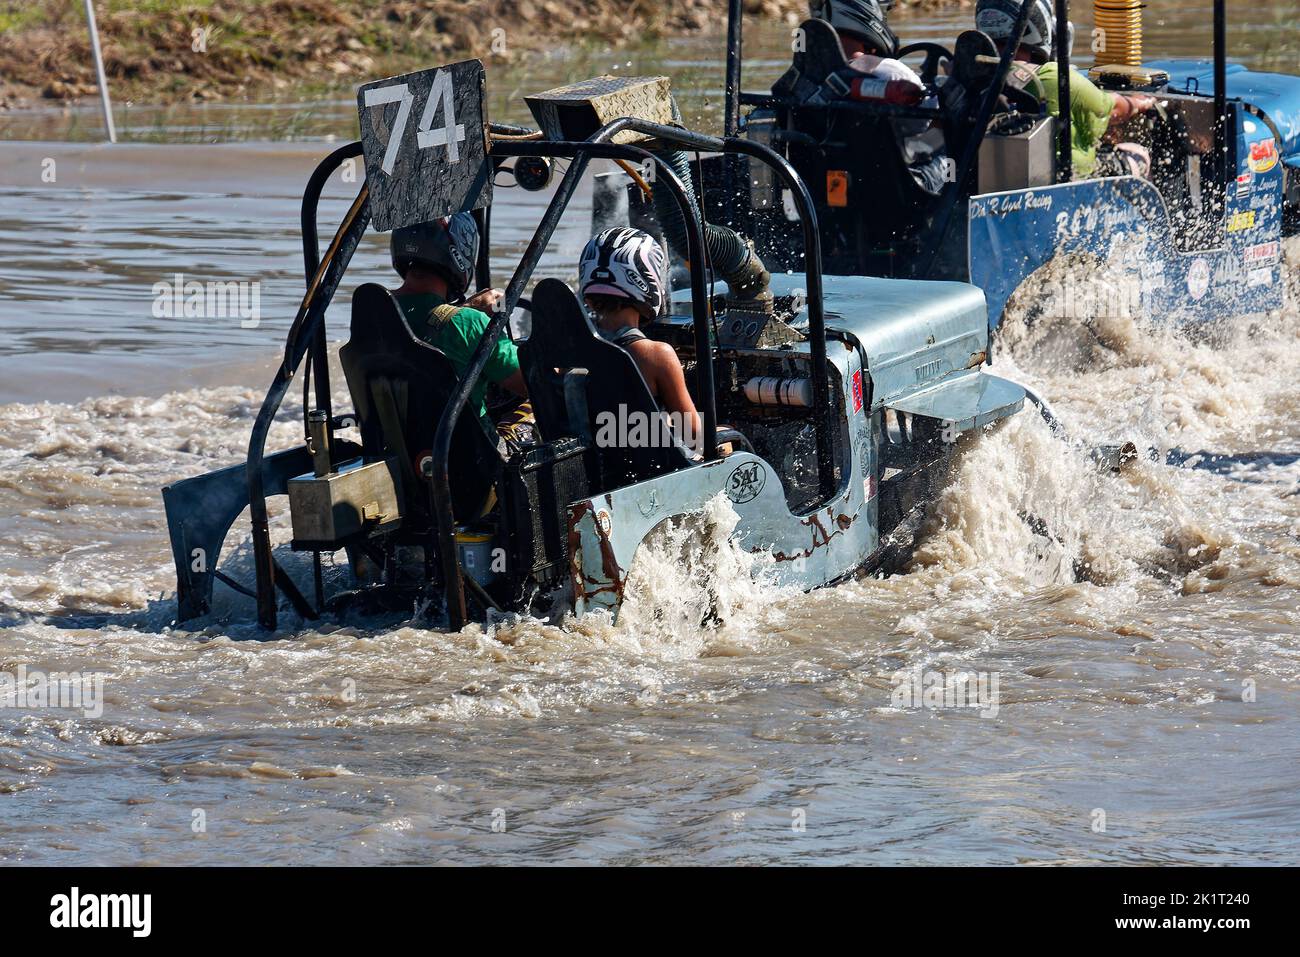 2 swamp buggies, moving through water, action, close-up, water spray, motion, jeep style, vehicle sport, Florida Sports Park, Naples, FL Stock Photo